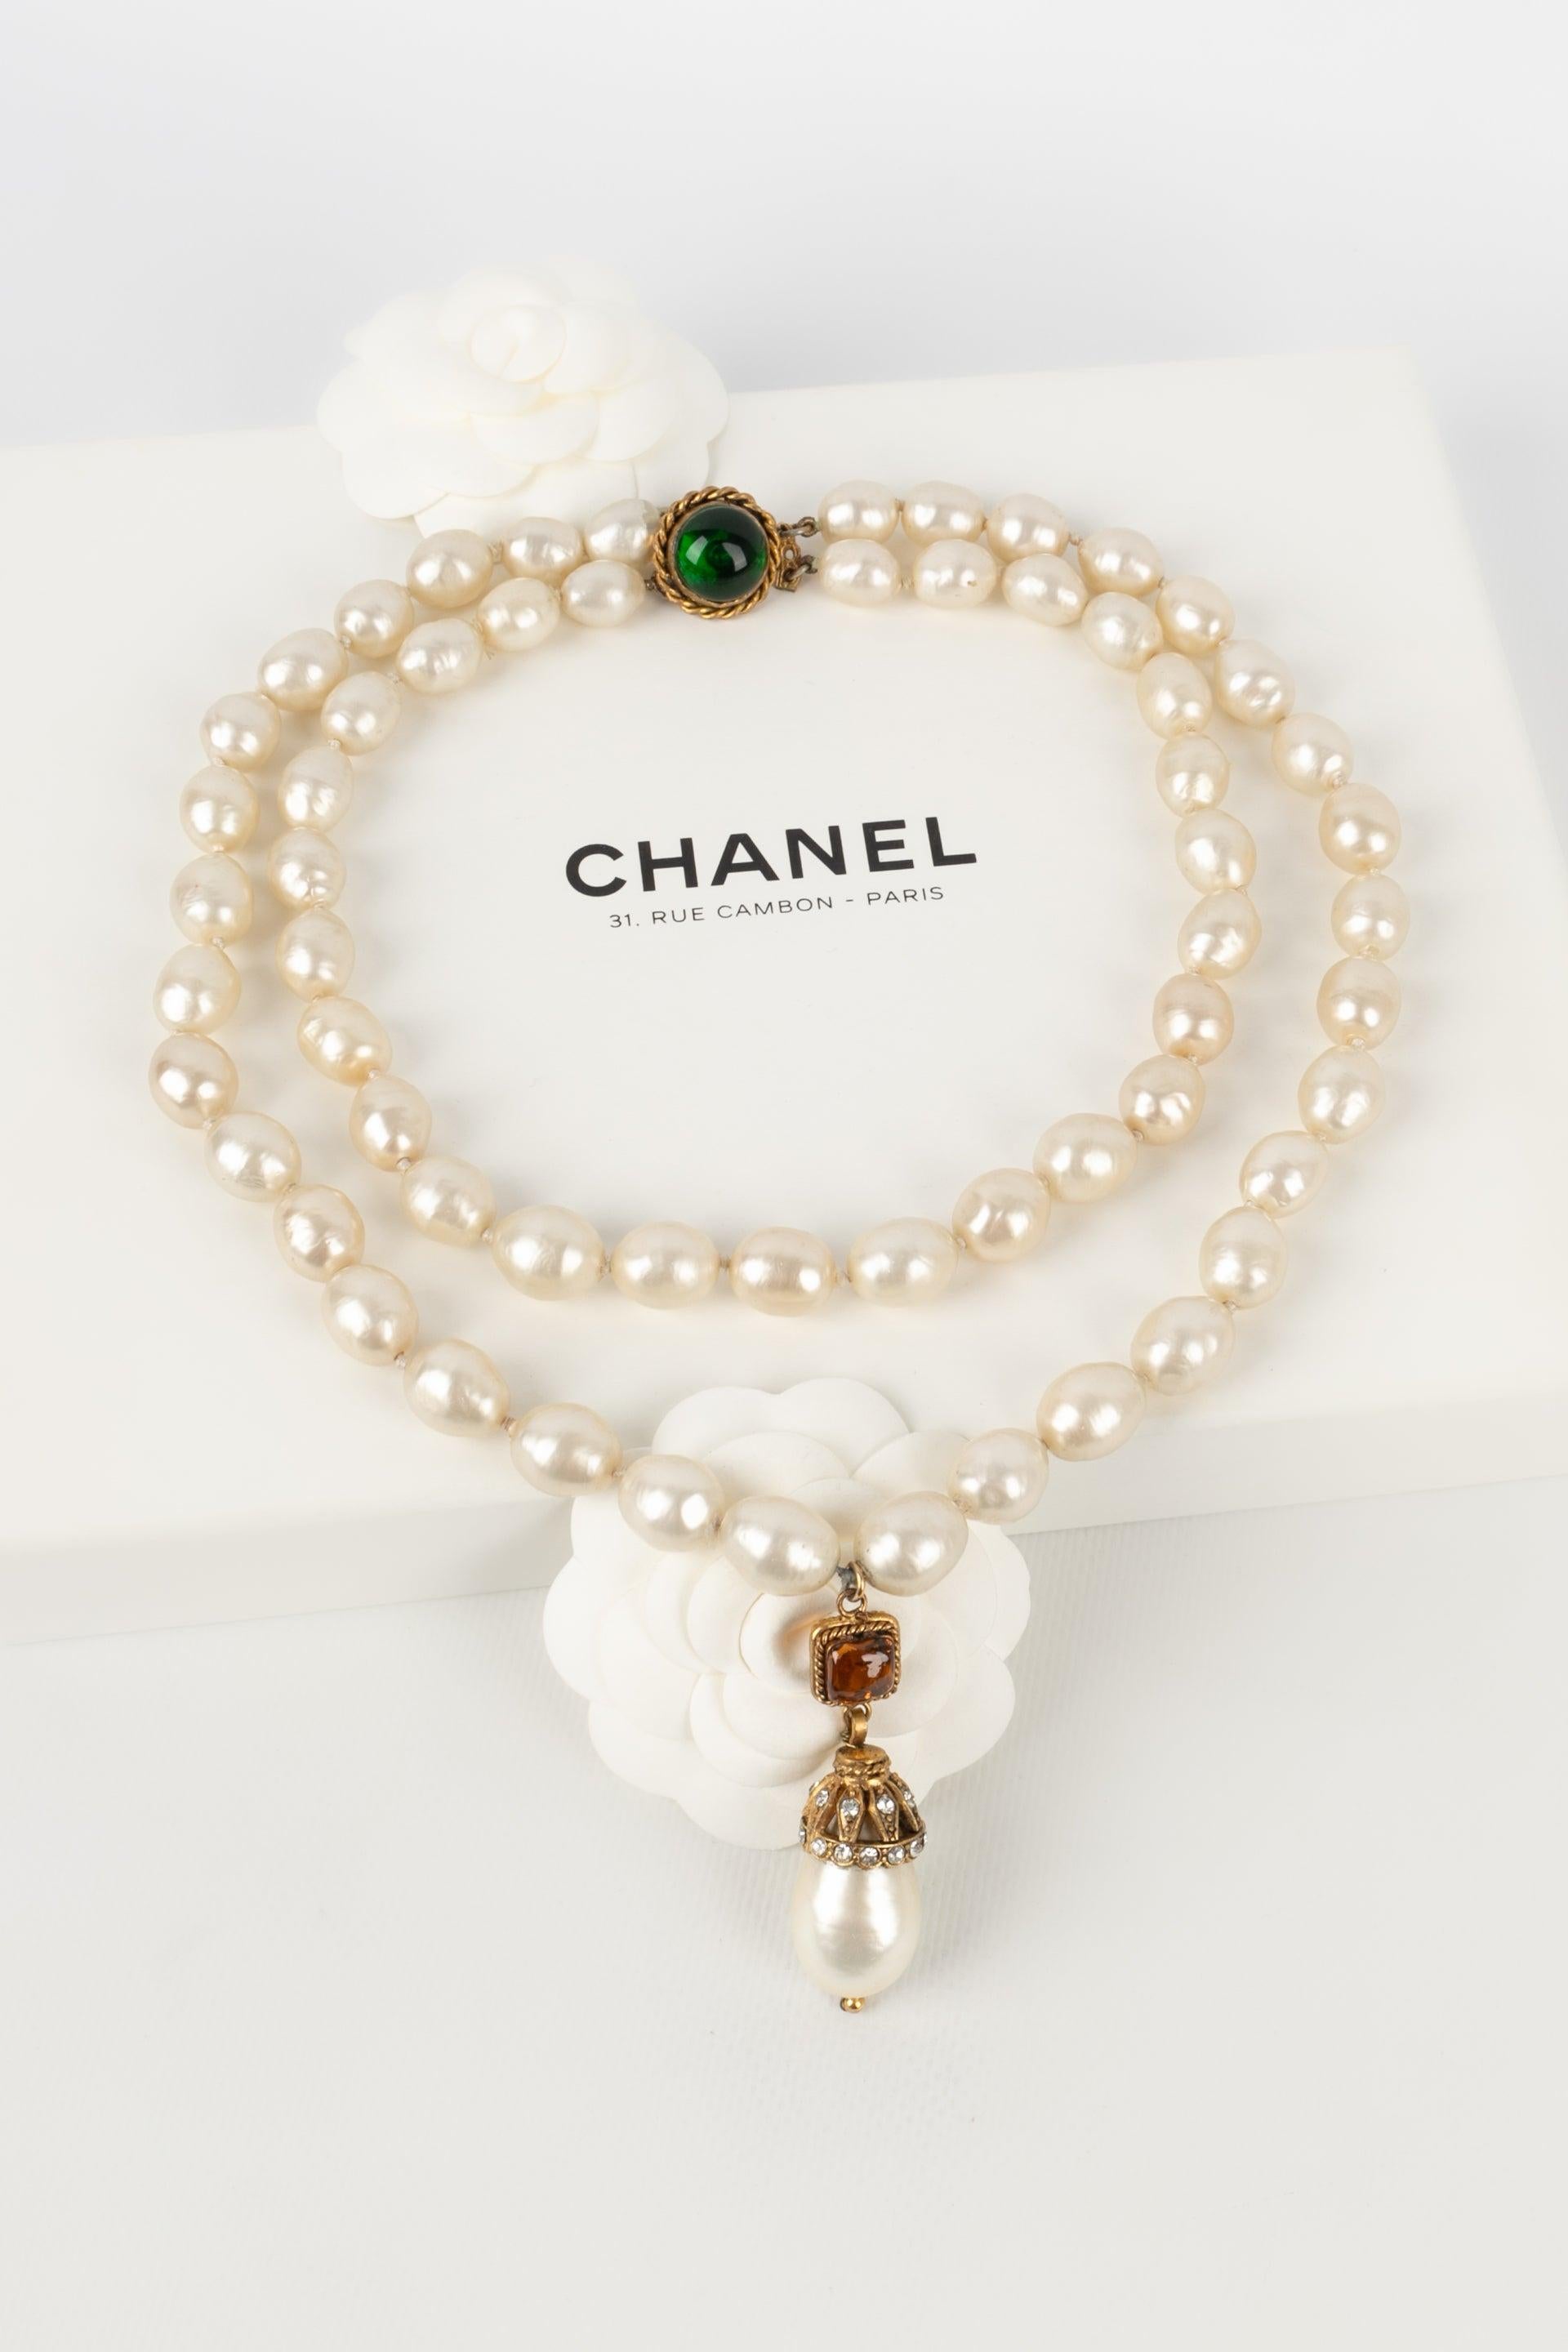 Chanel Two Knot Pearl Necklace, 1980s For Sale 2